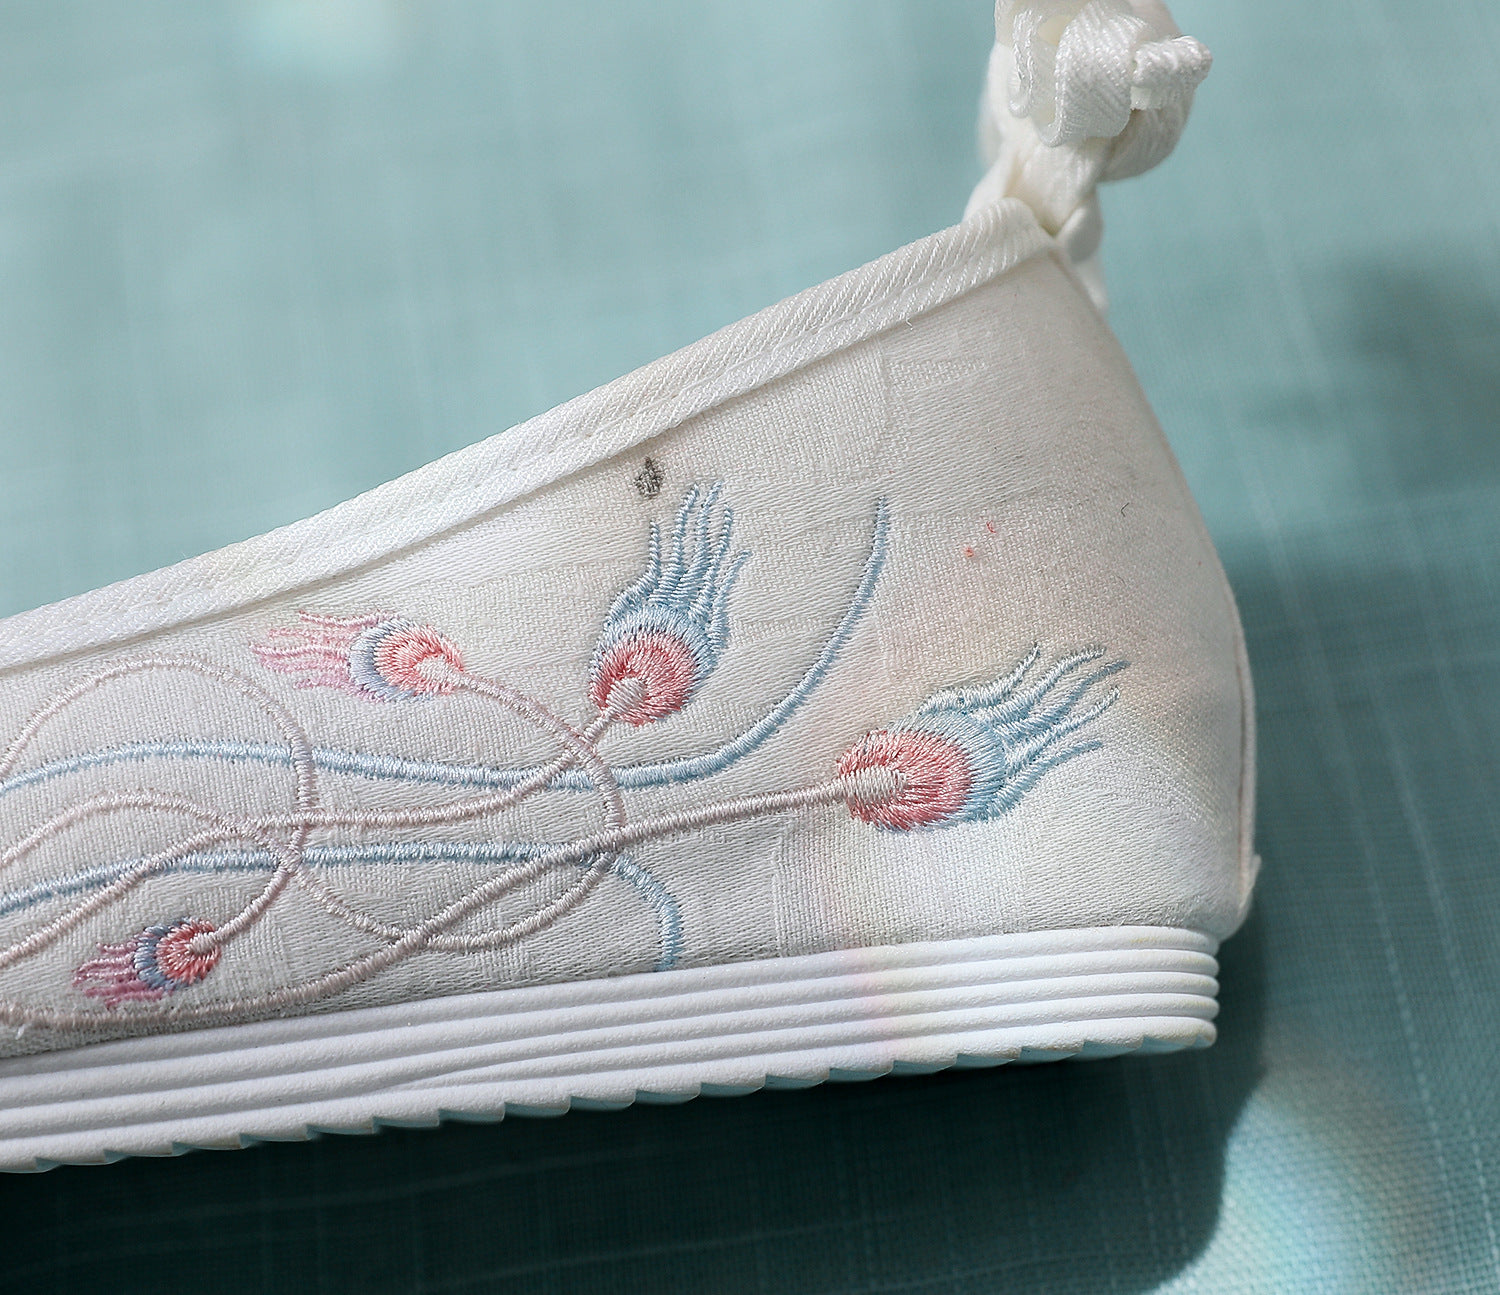 Increasing Insole Bow Antique Embroidered For Canvas Shoes